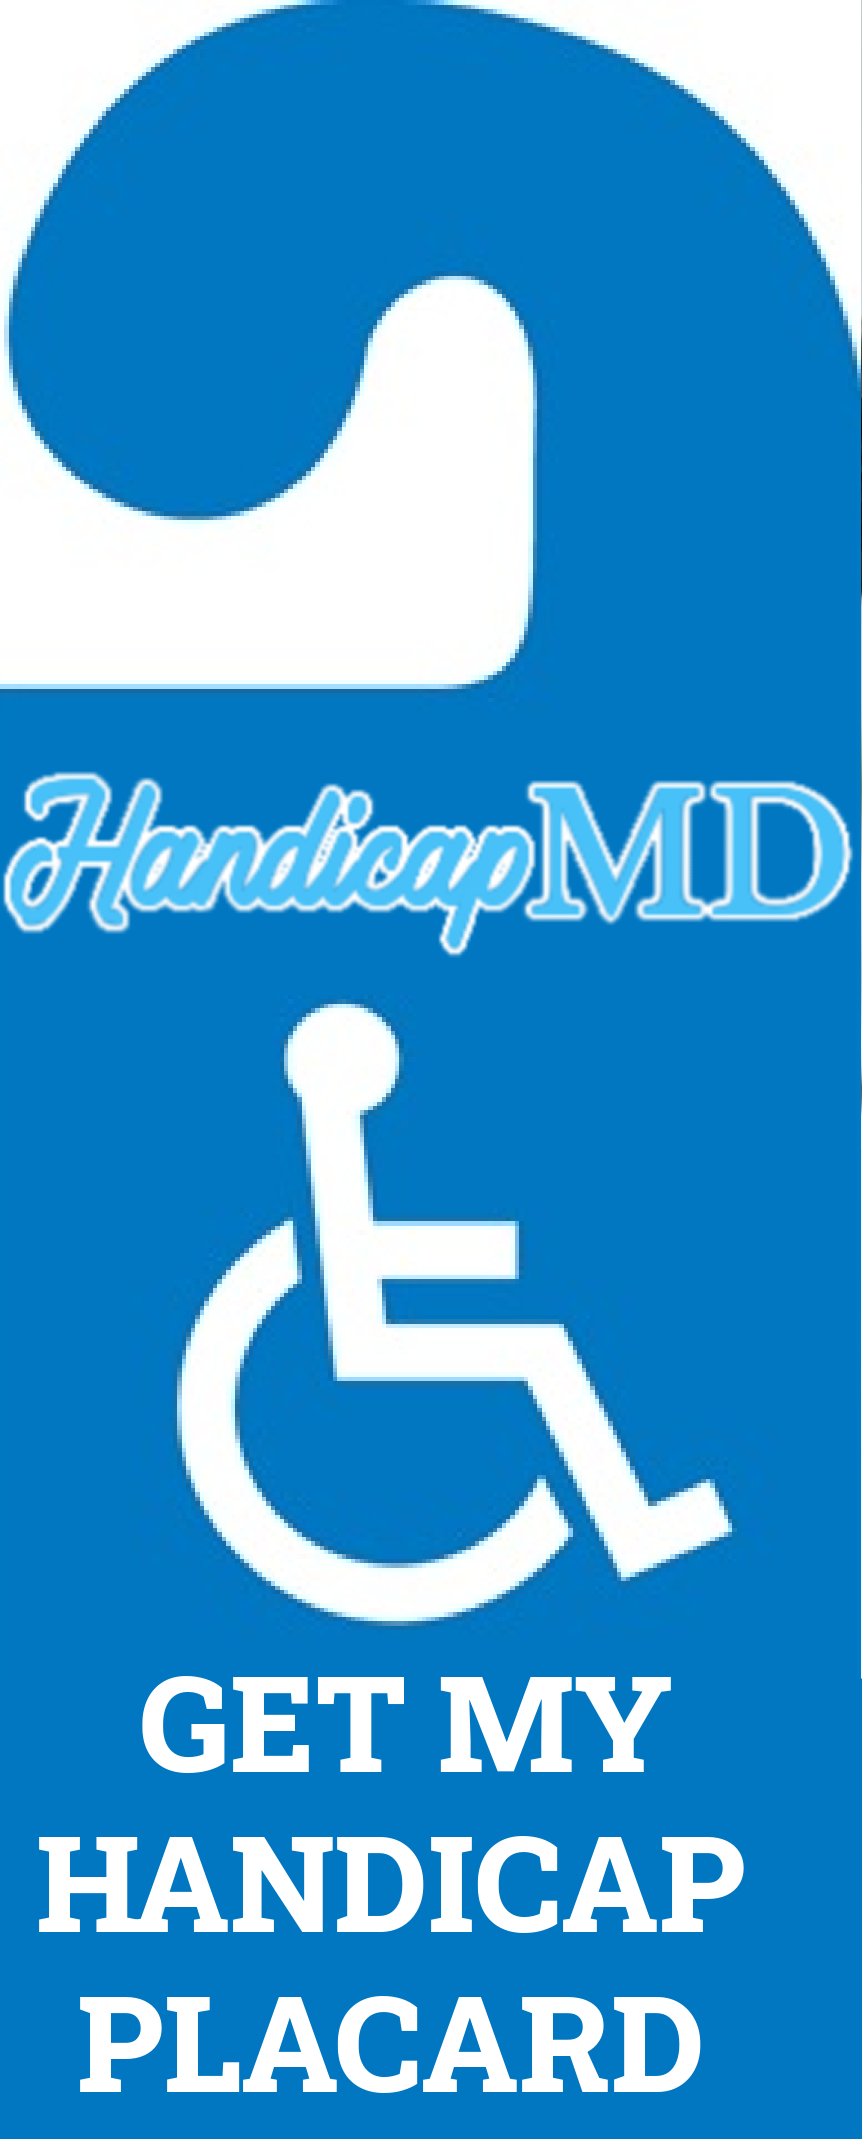 Tips for Displaying Your Handicap Placard Correctly in New Mexico